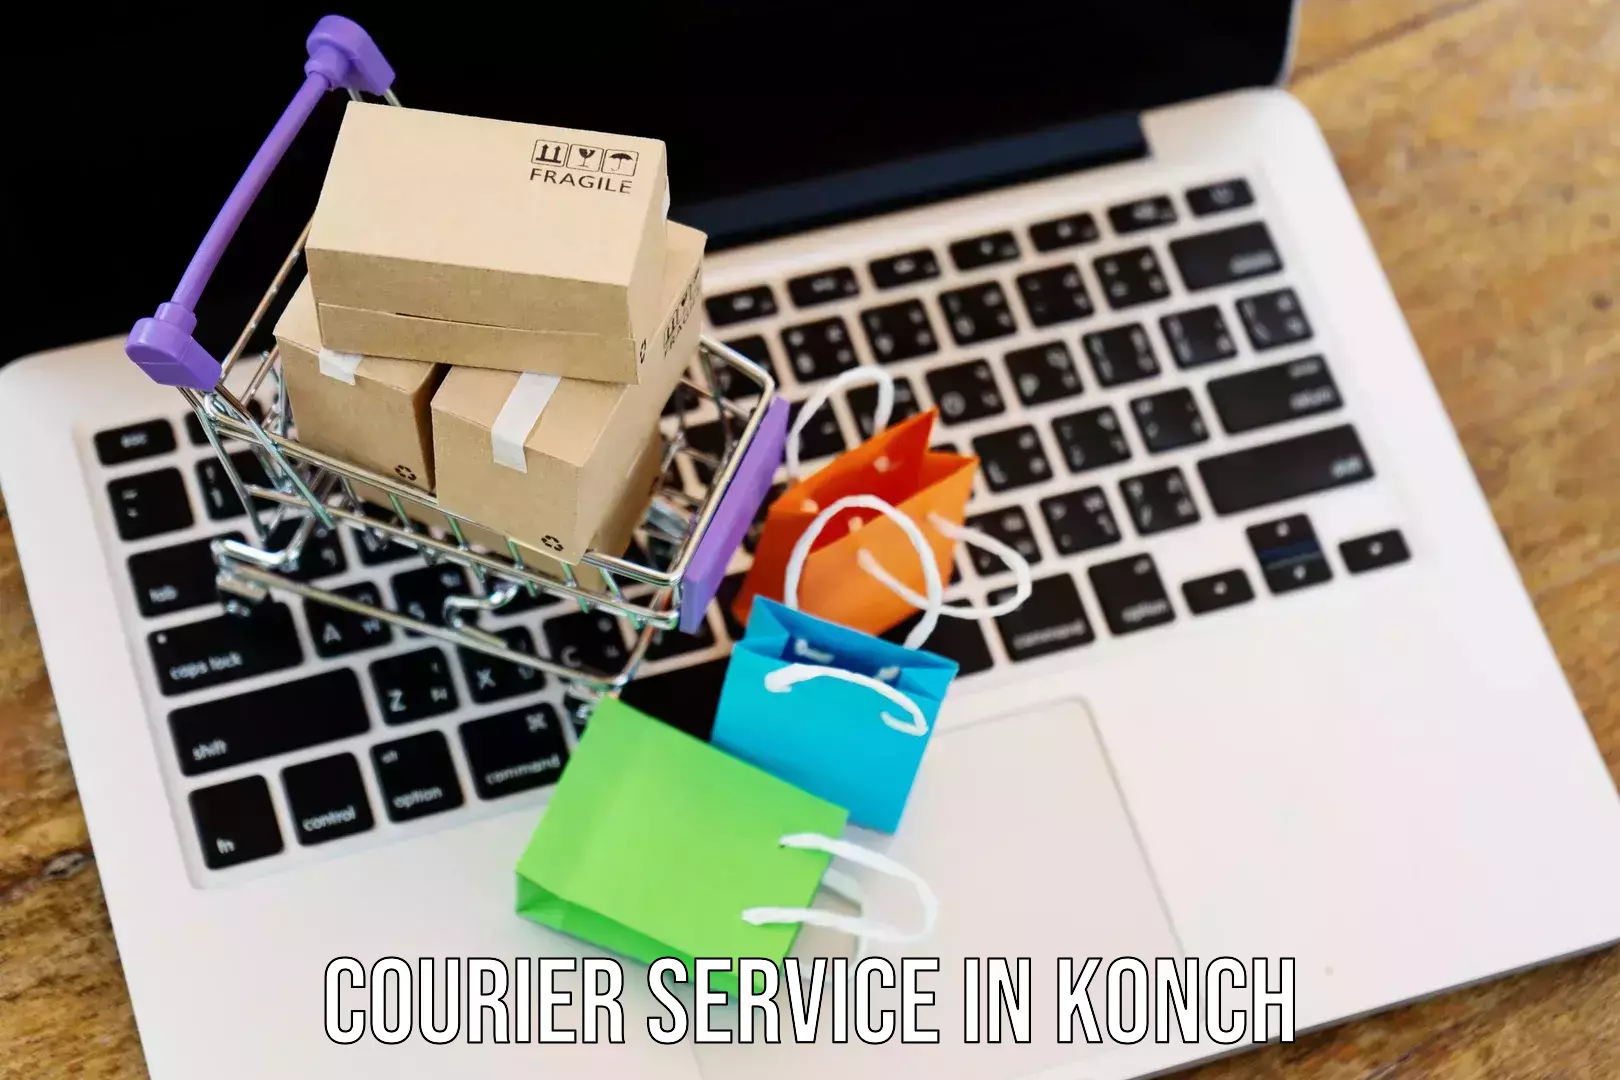 Courier service booking in Konch